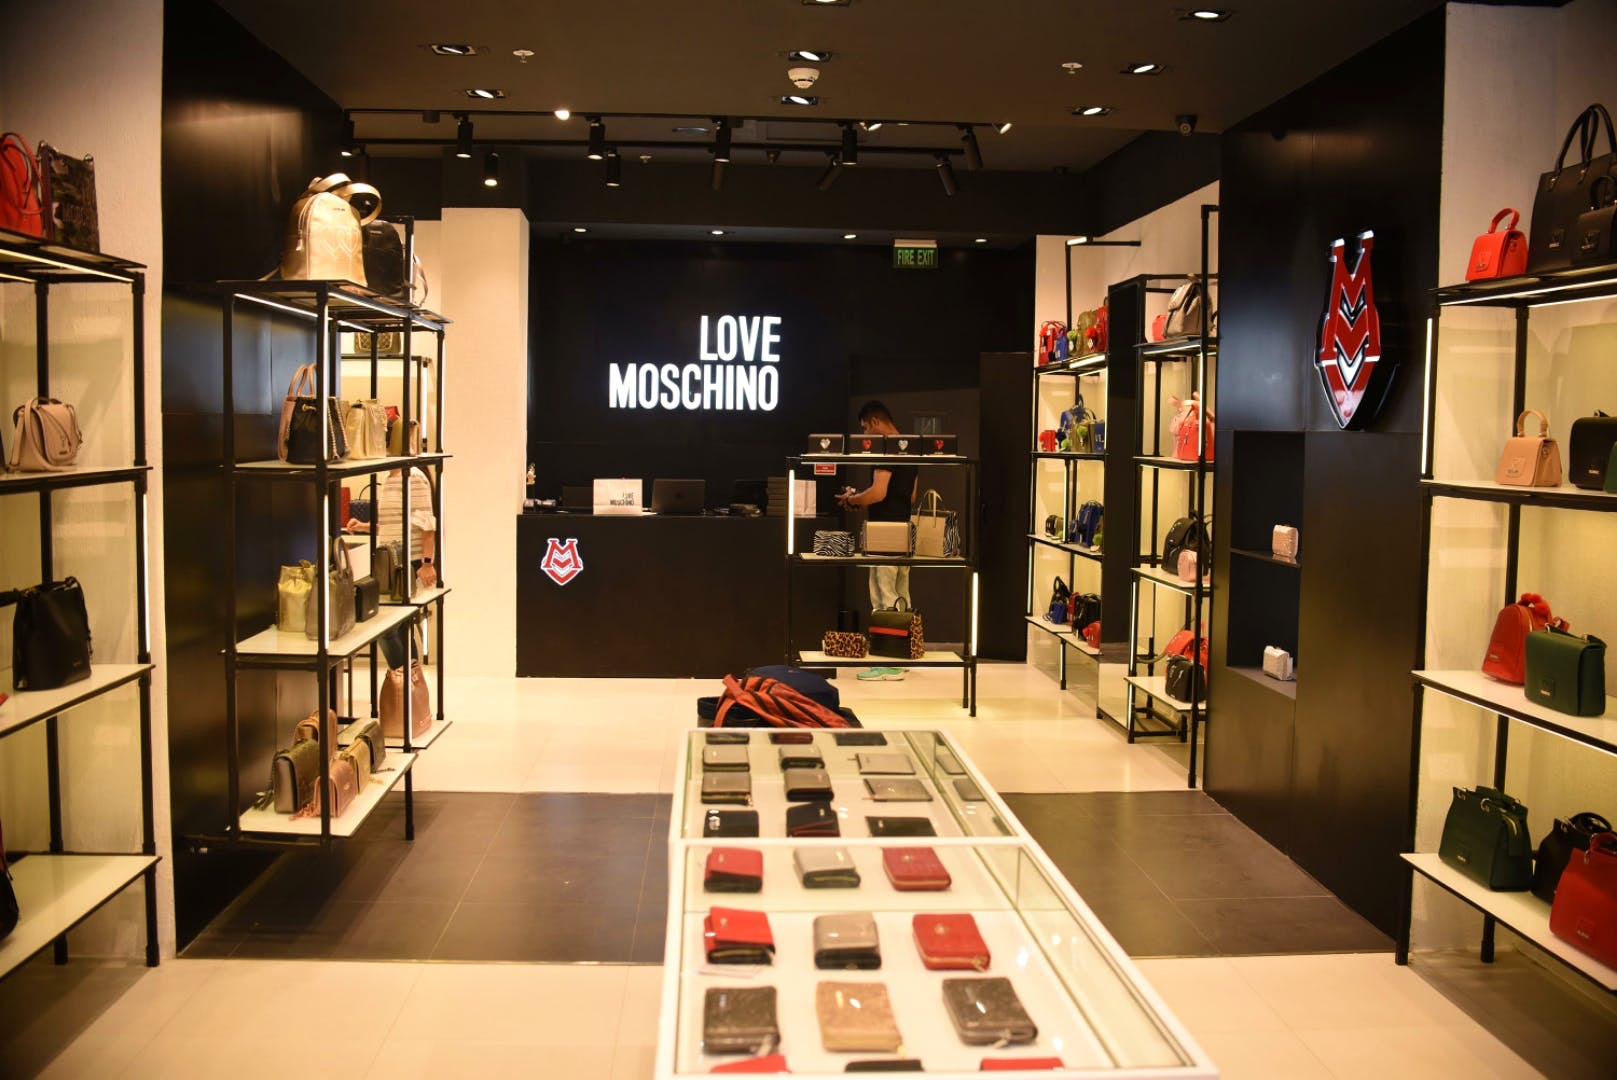 Delhi's First Love Moschino Store Is 